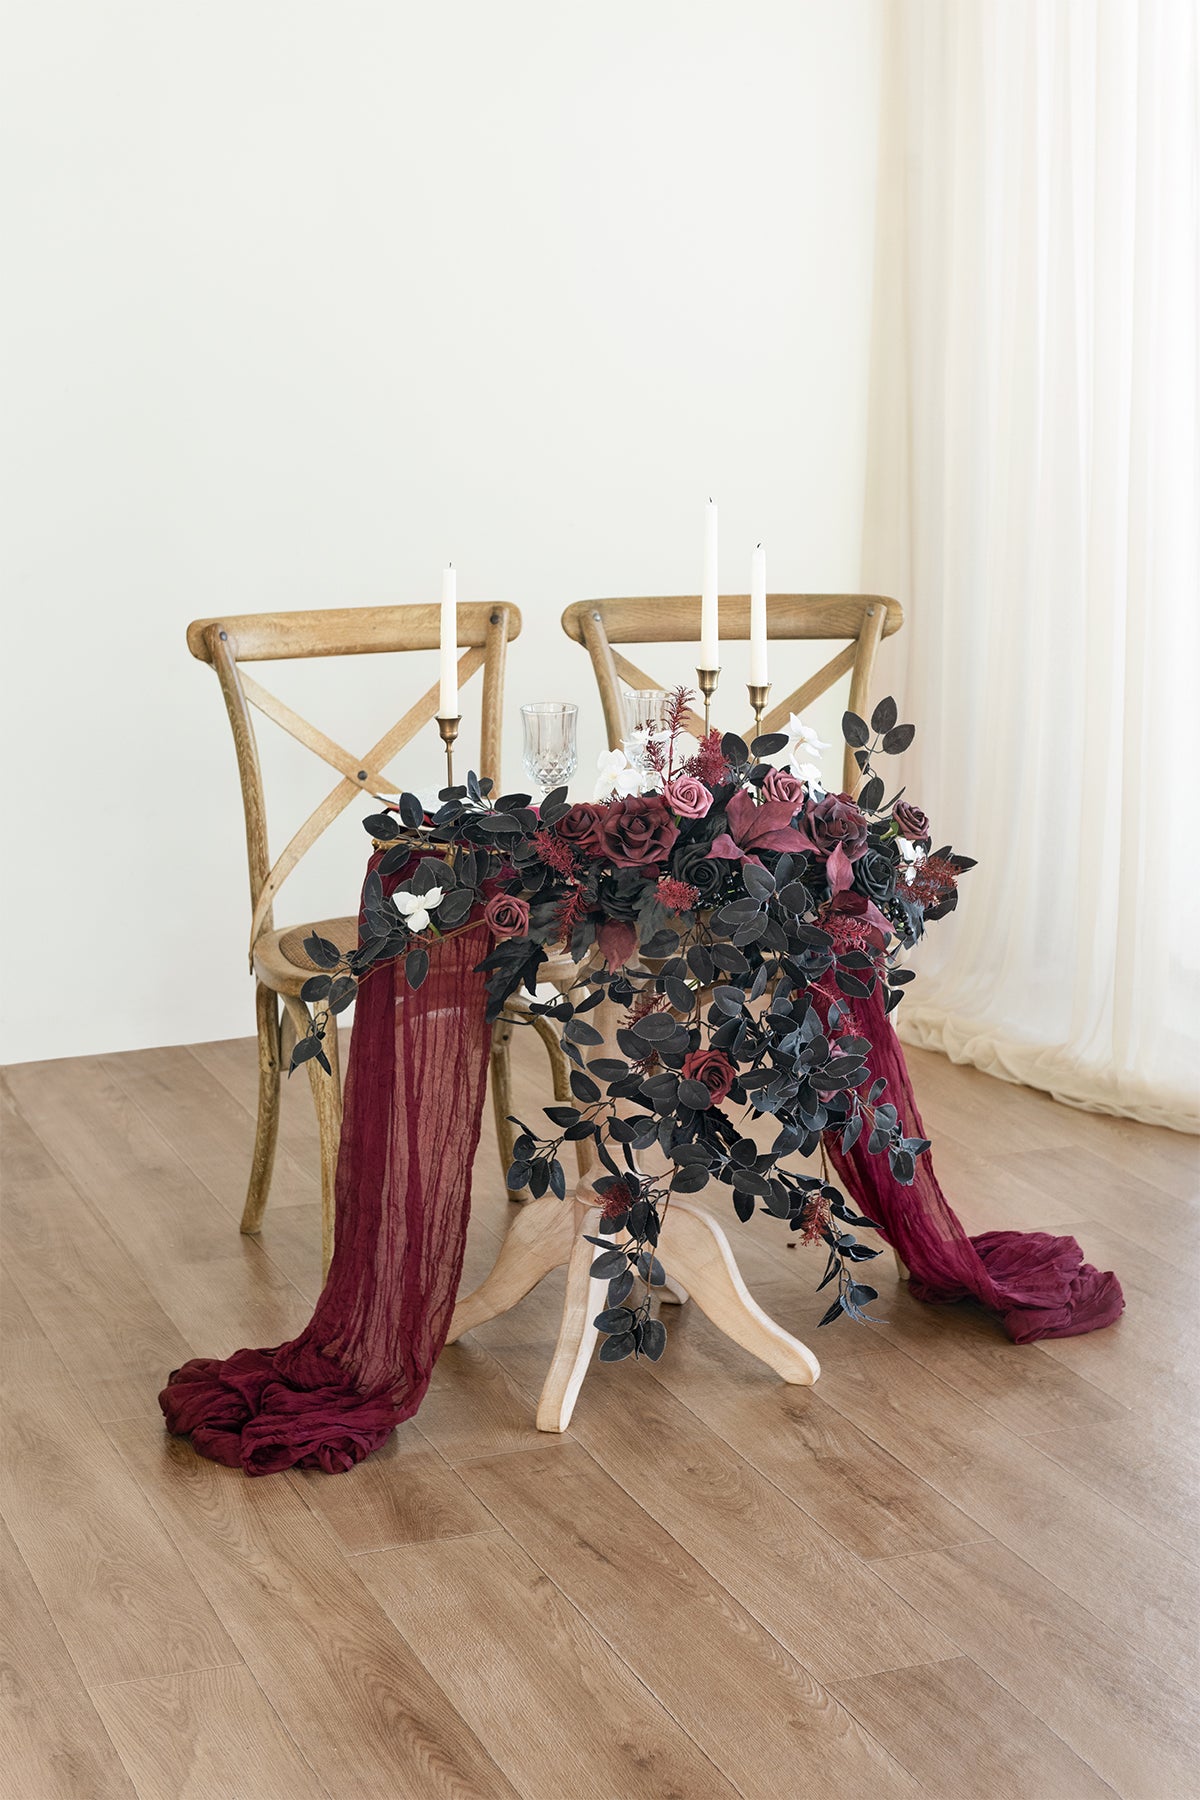 Sweetheart Table Floral Swags in Moody Burgundy & Black – Ling's Moment